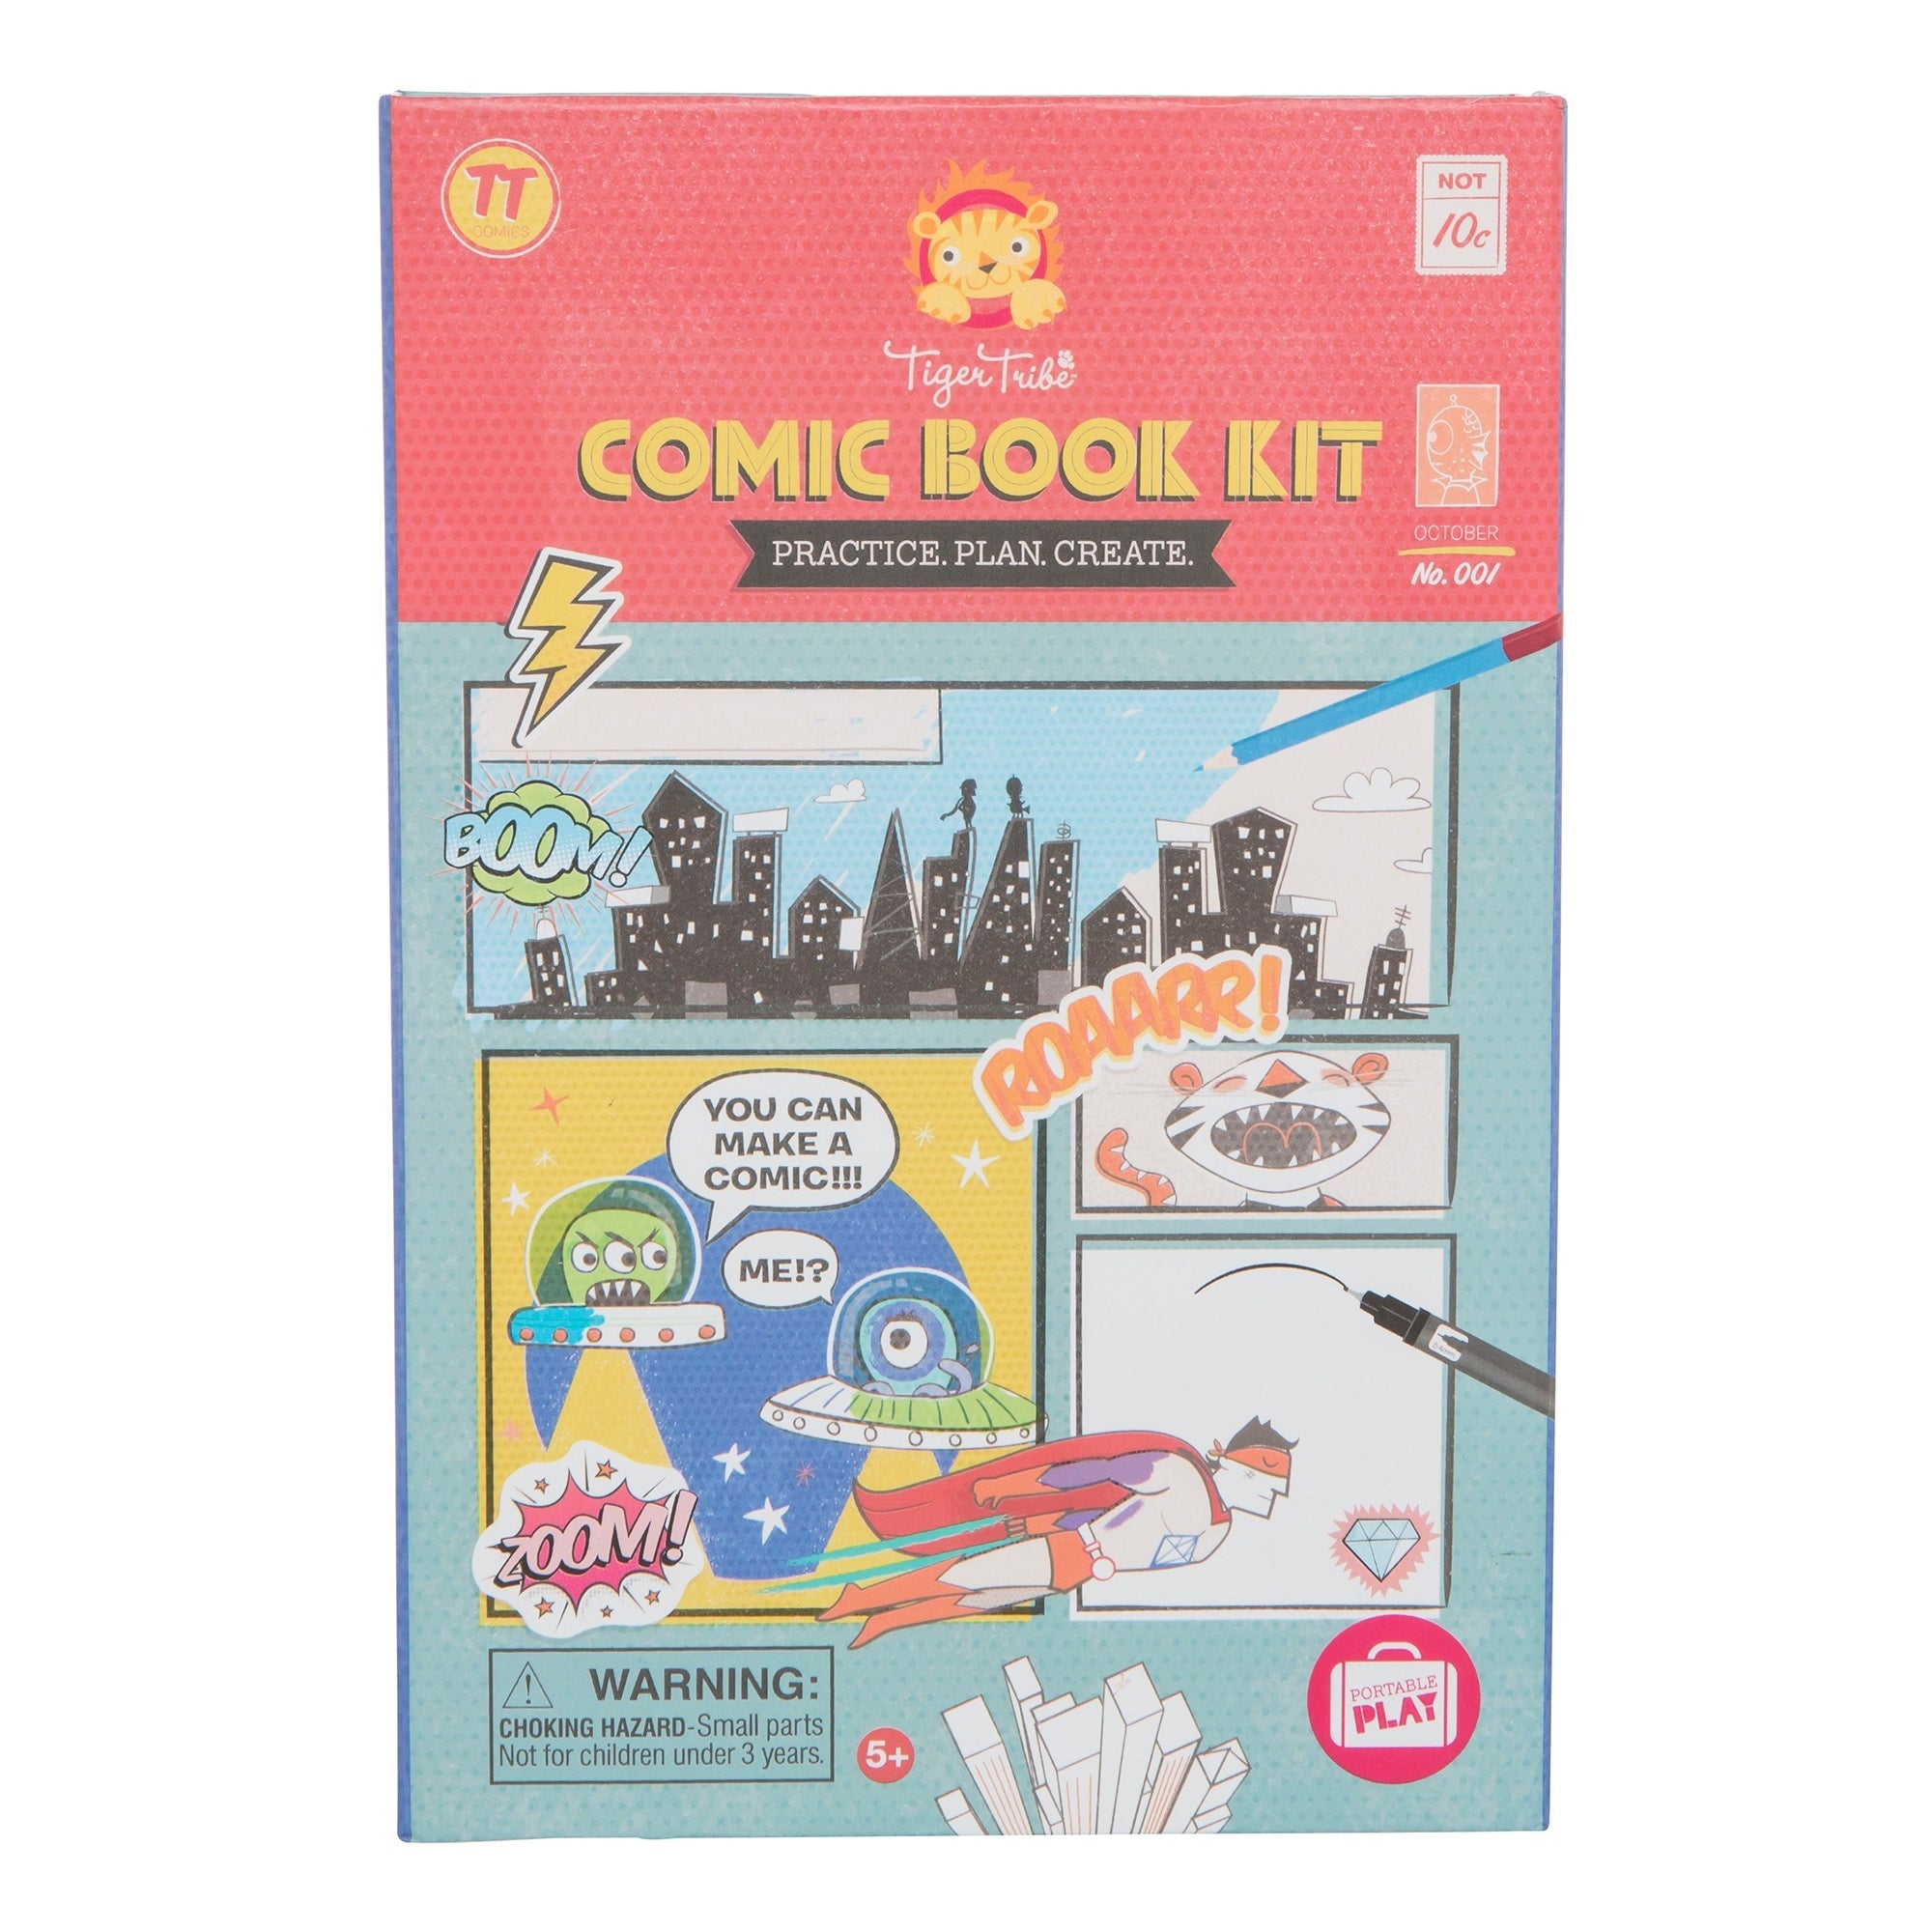 Make Your Own Comic Book Kit: A step-by-step guide for learning to